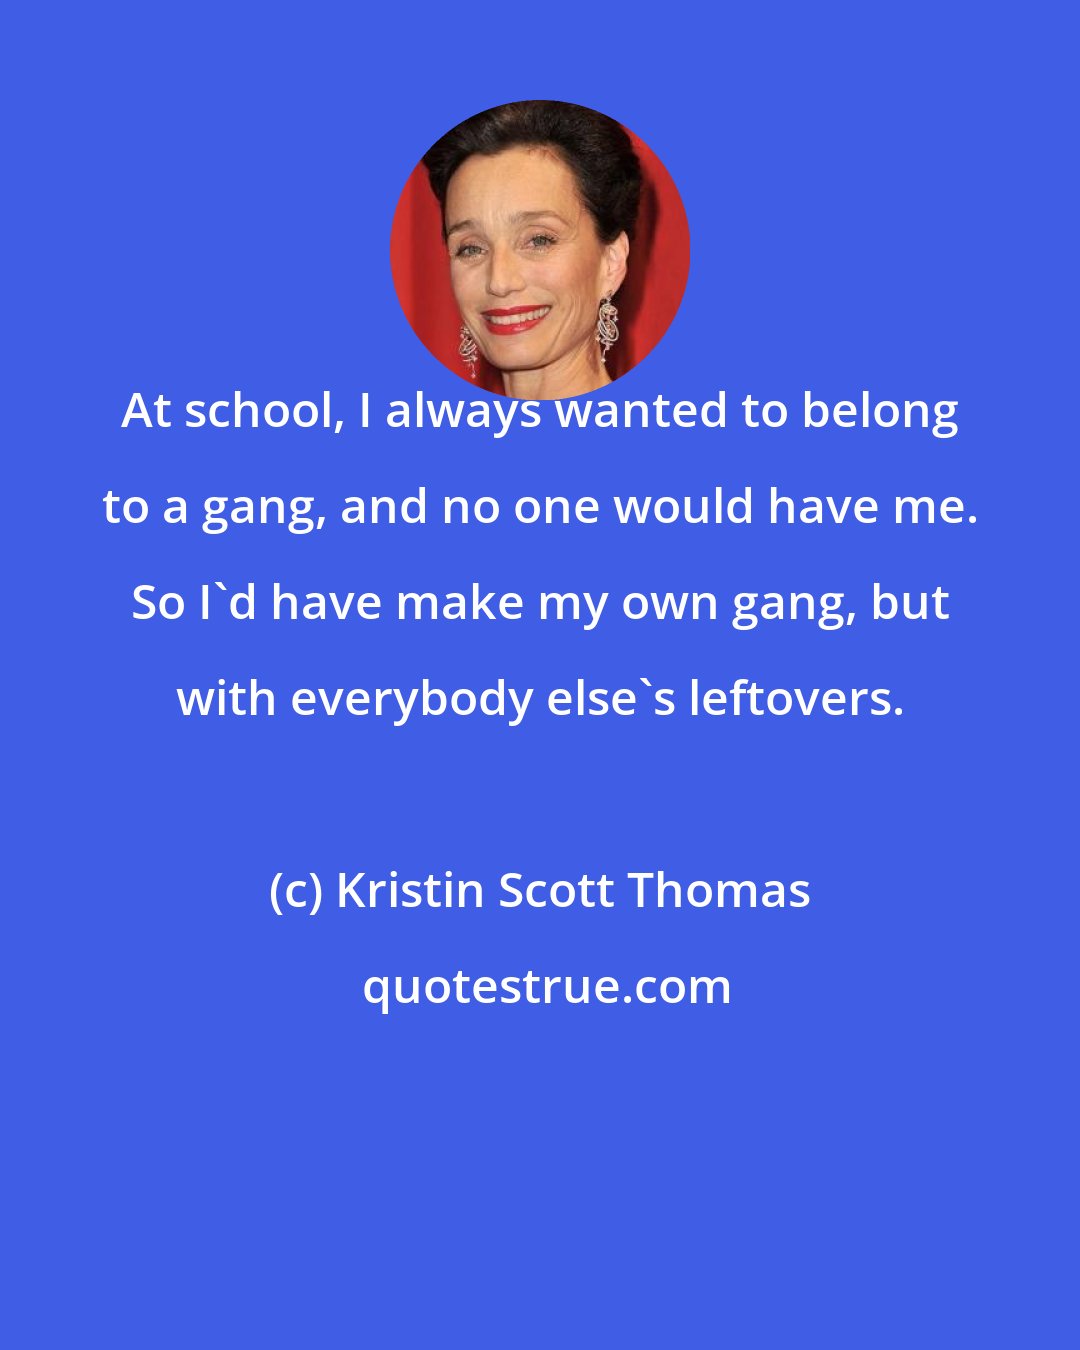 Kristin Scott Thomas: At school, I always wanted to belong to a gang, and no one would have me. So I'd have make my own gang, but with everybody else's leftovers.